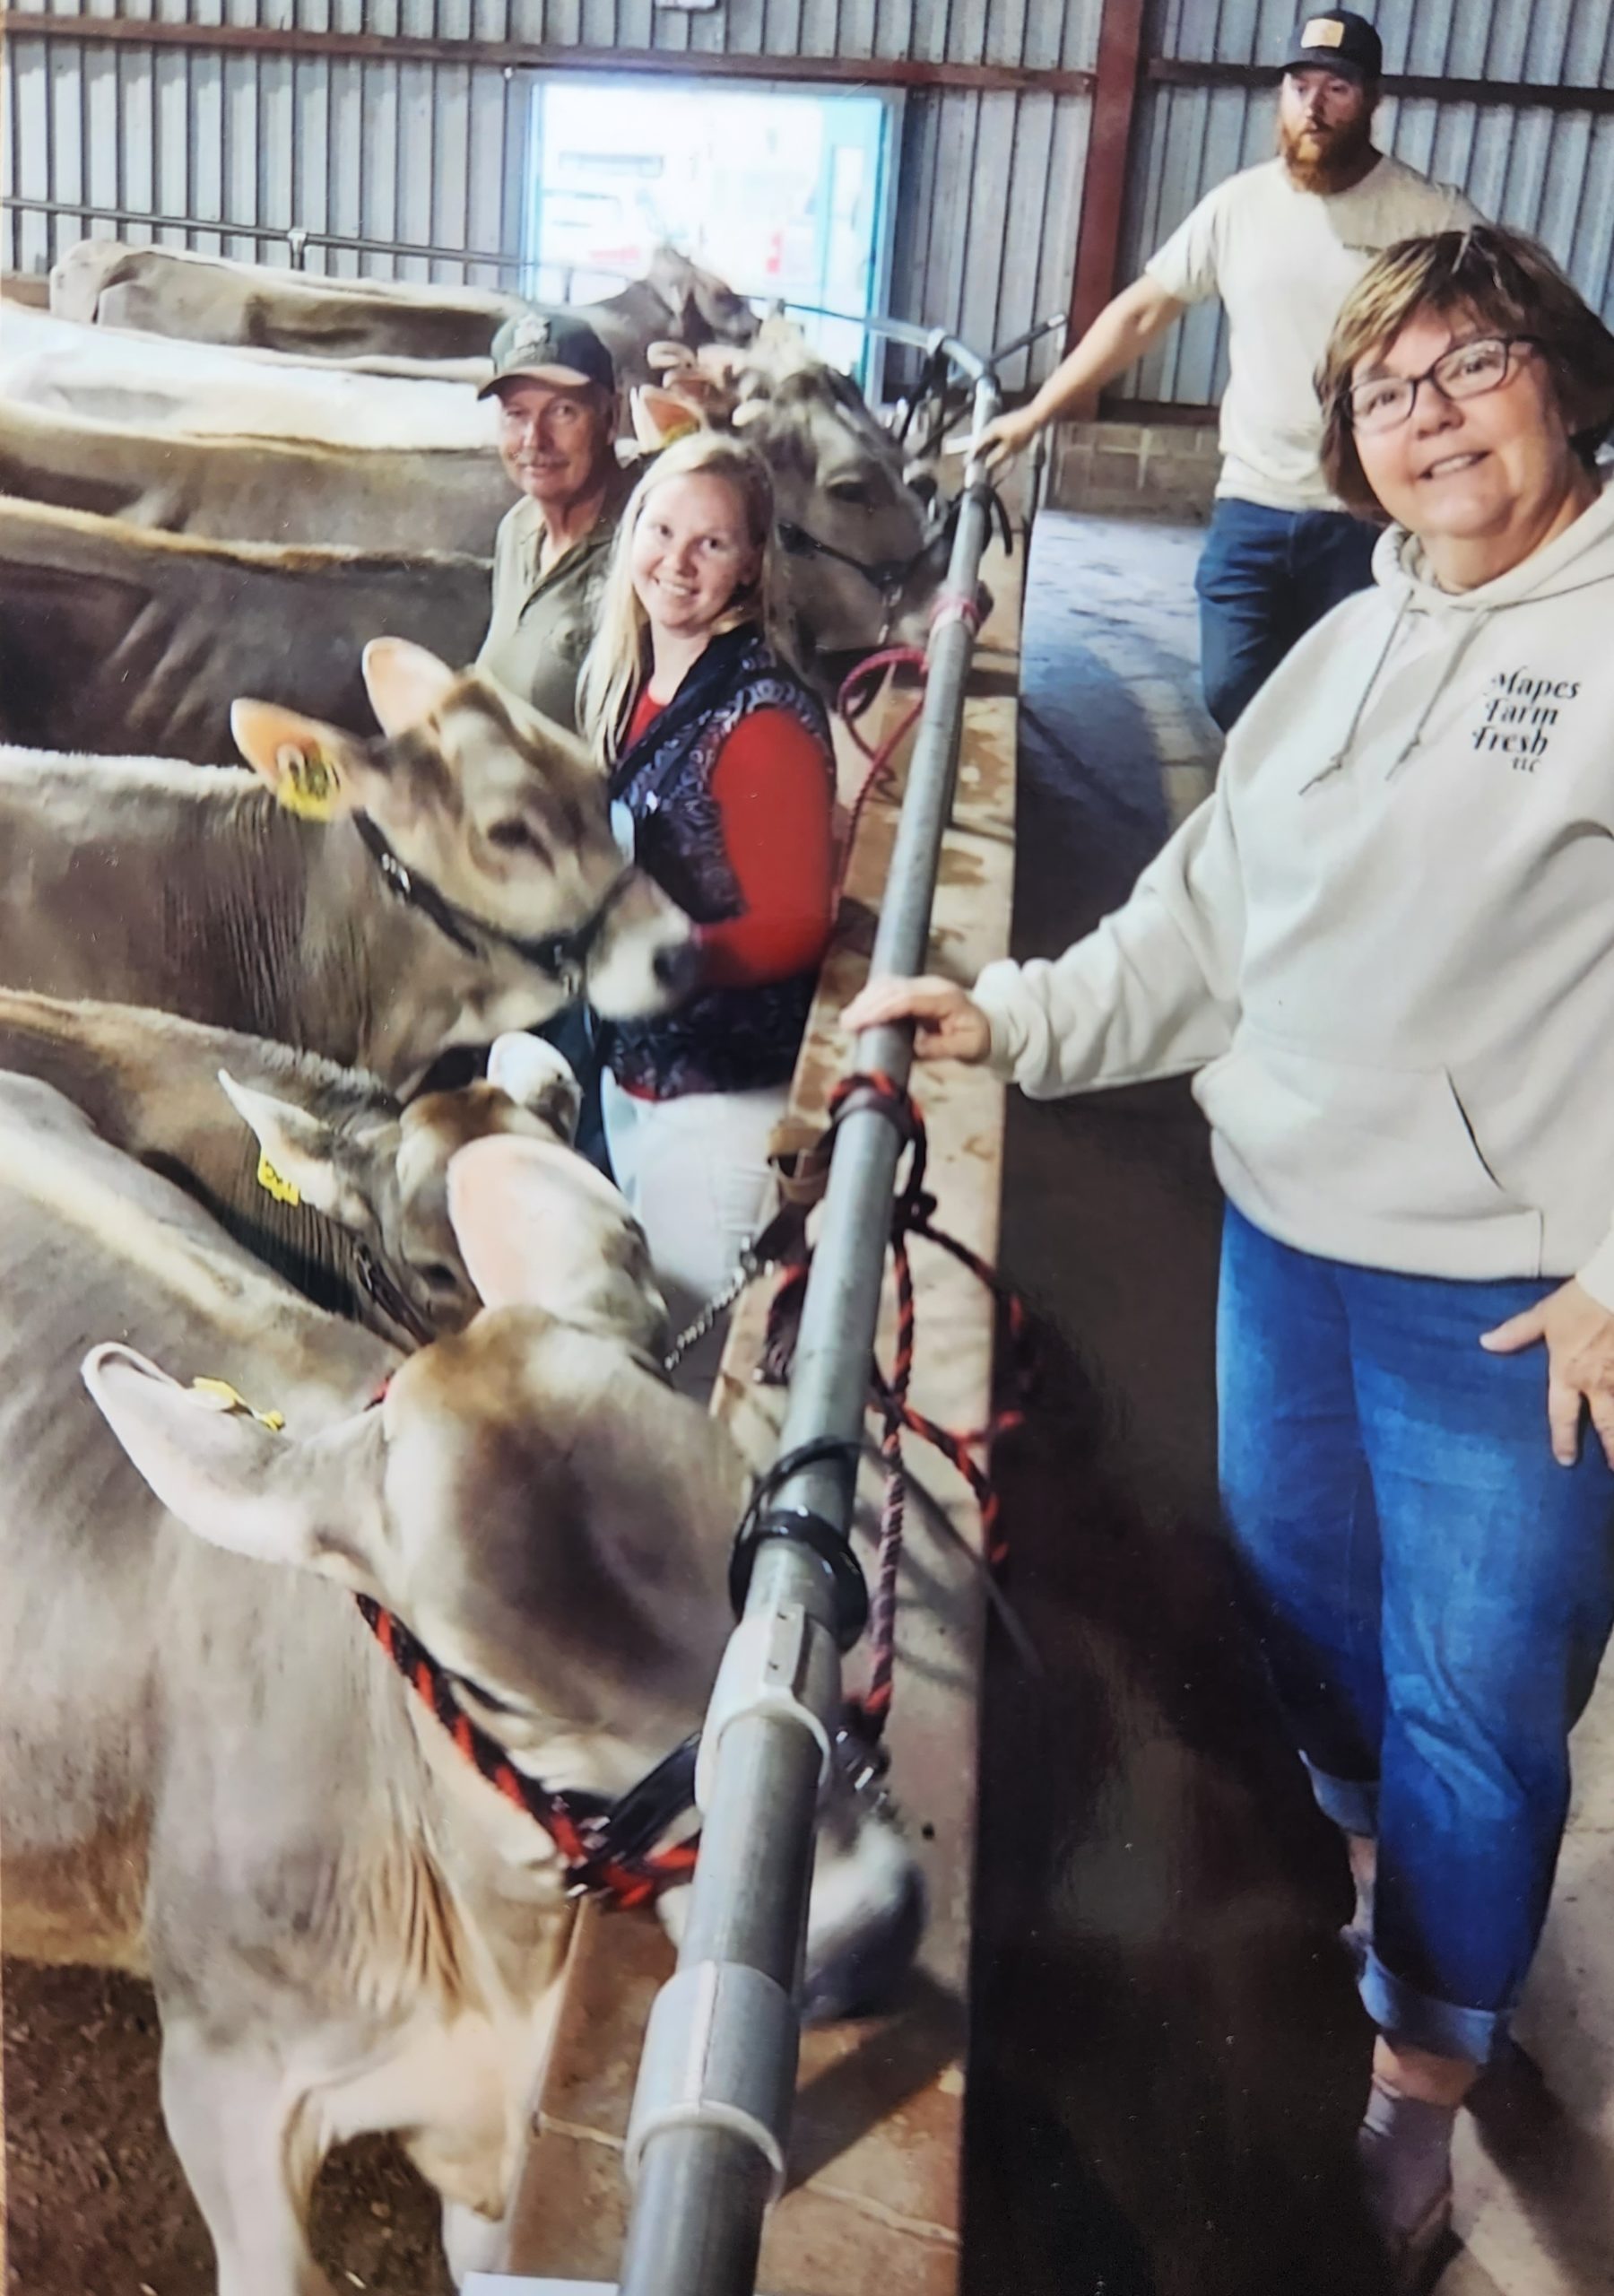 A family of dairy farmers inside a barn with dairy cows.